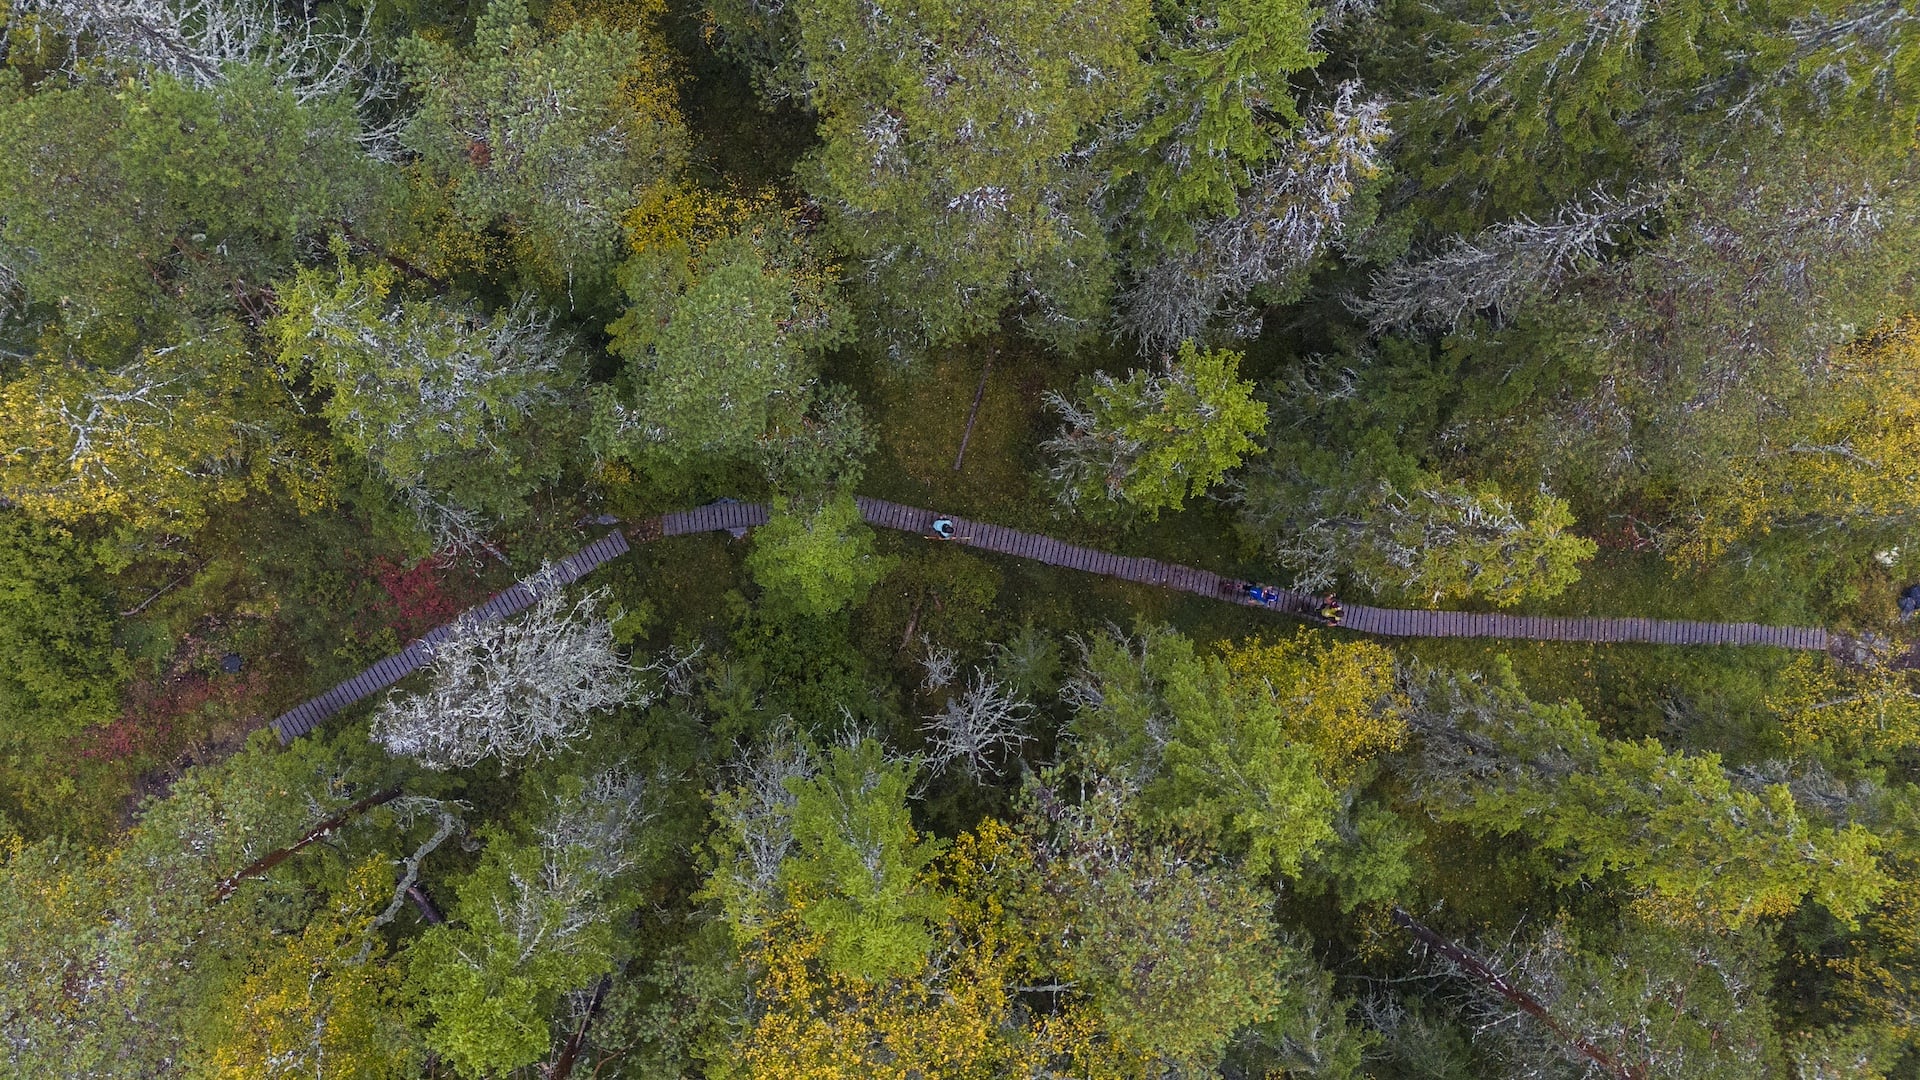 Drone view looking down on forest, wooden path and few runners.